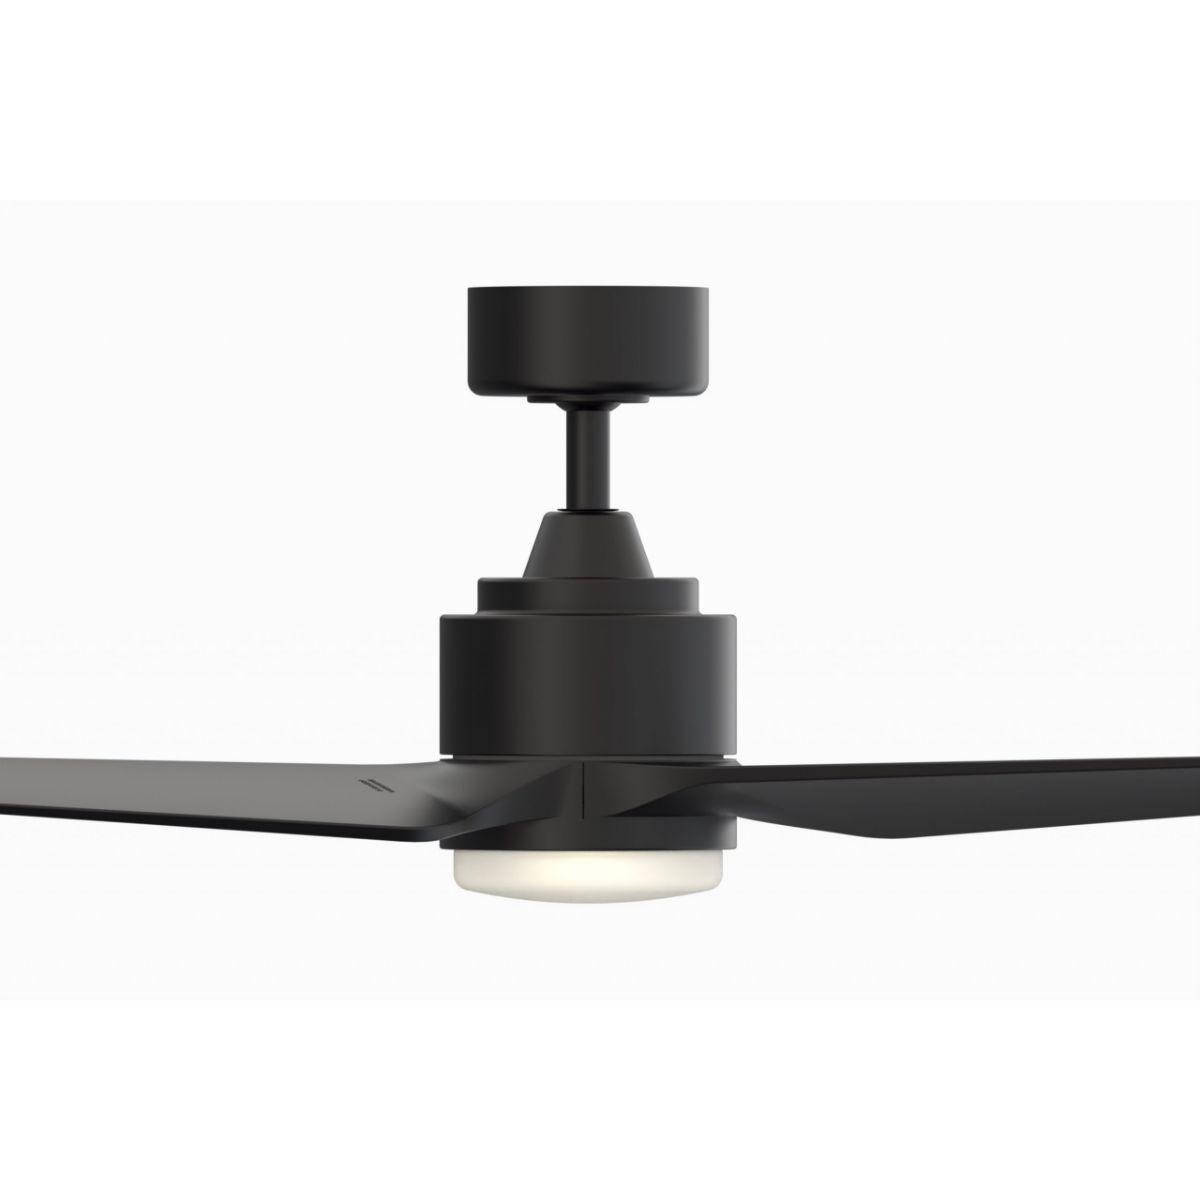 TriAire Custom Outdoor Ceiling Fan Motor With Remote, Set of 3 Blades (44 - 60 Inch) Sold Separately - Bees Lighting